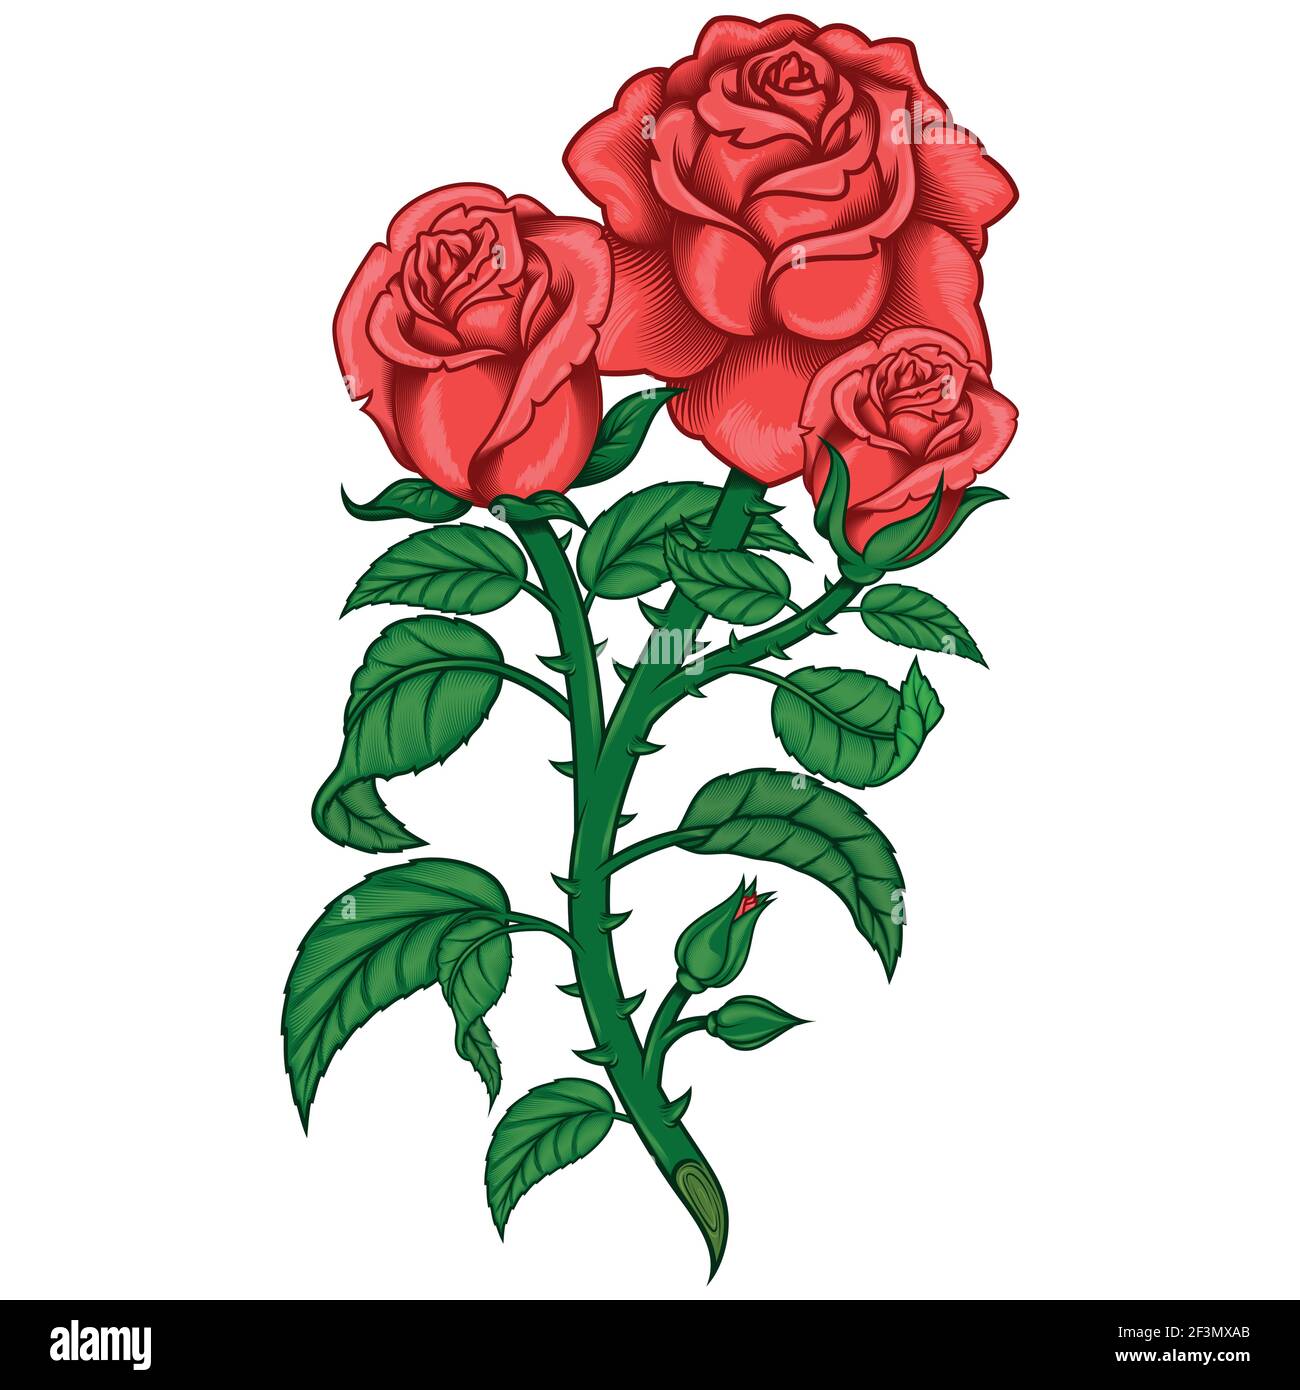 Vector design of a bouquet of roses, with leaves stem and thorns, all on white background Stock Vector